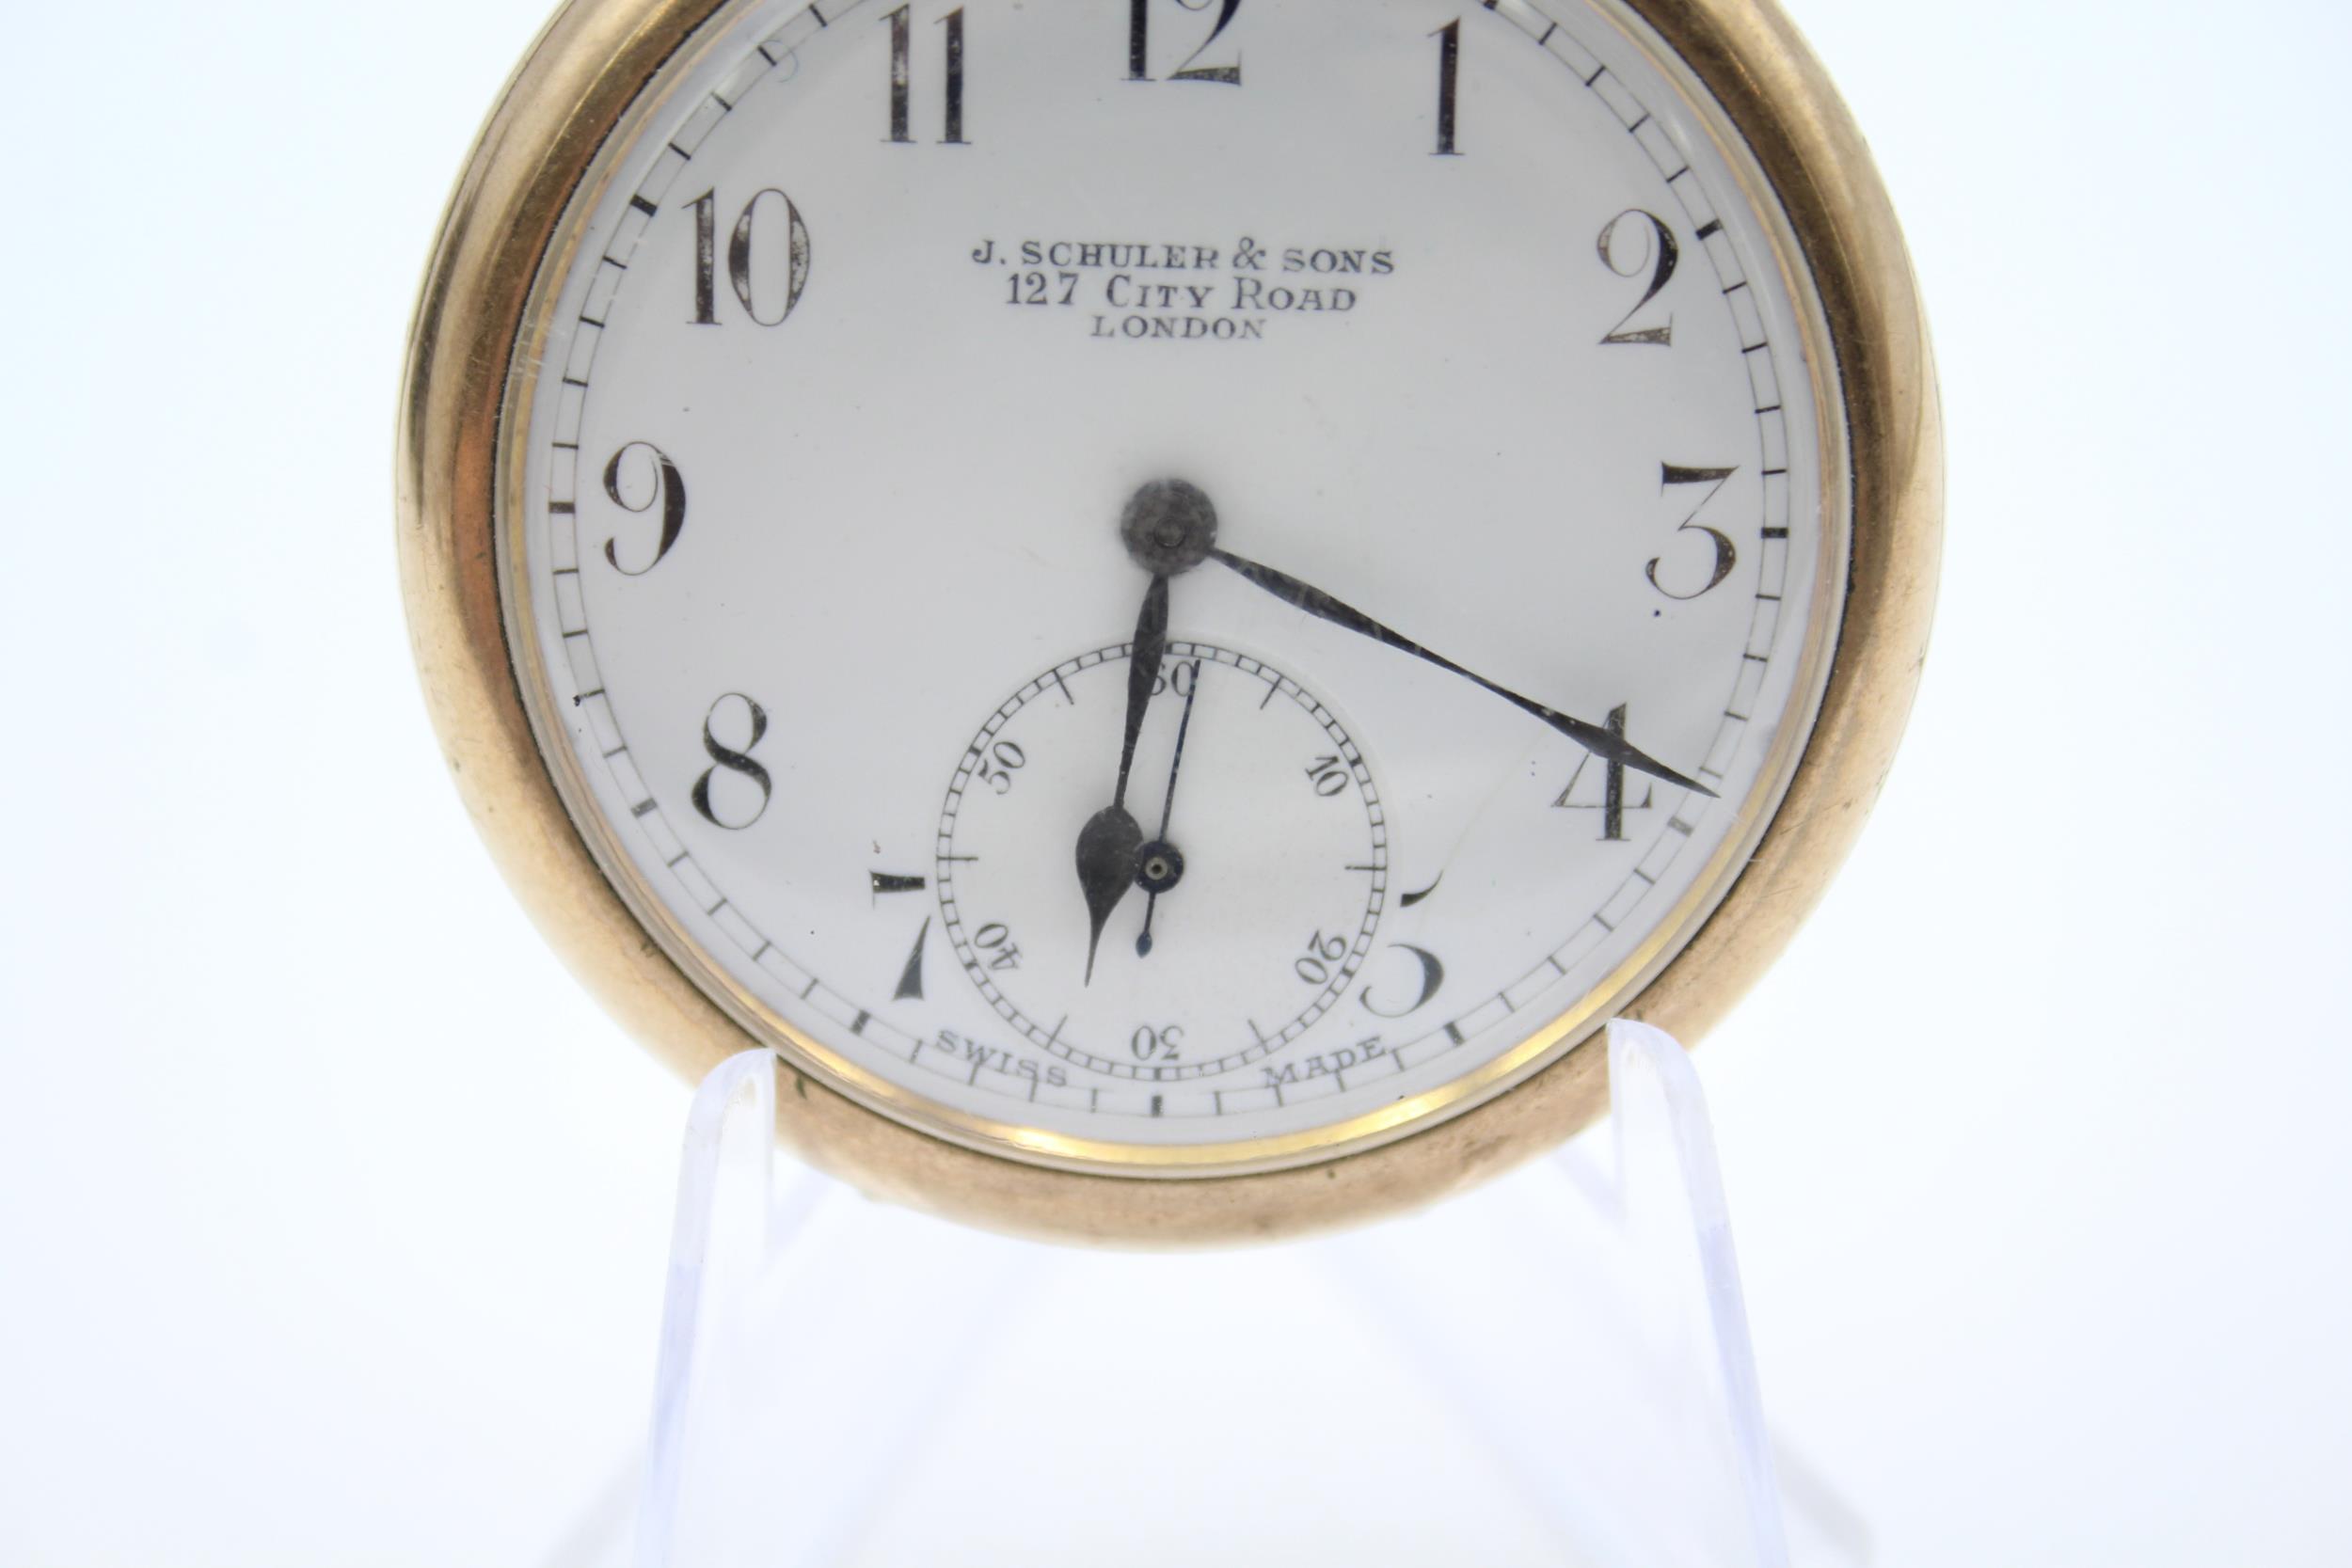 Gents Rolled Gold Open Face Pocket Watch Hand-wind WORKING - Gents Rolled Gold Open Face Pocket - Image 3 of 6